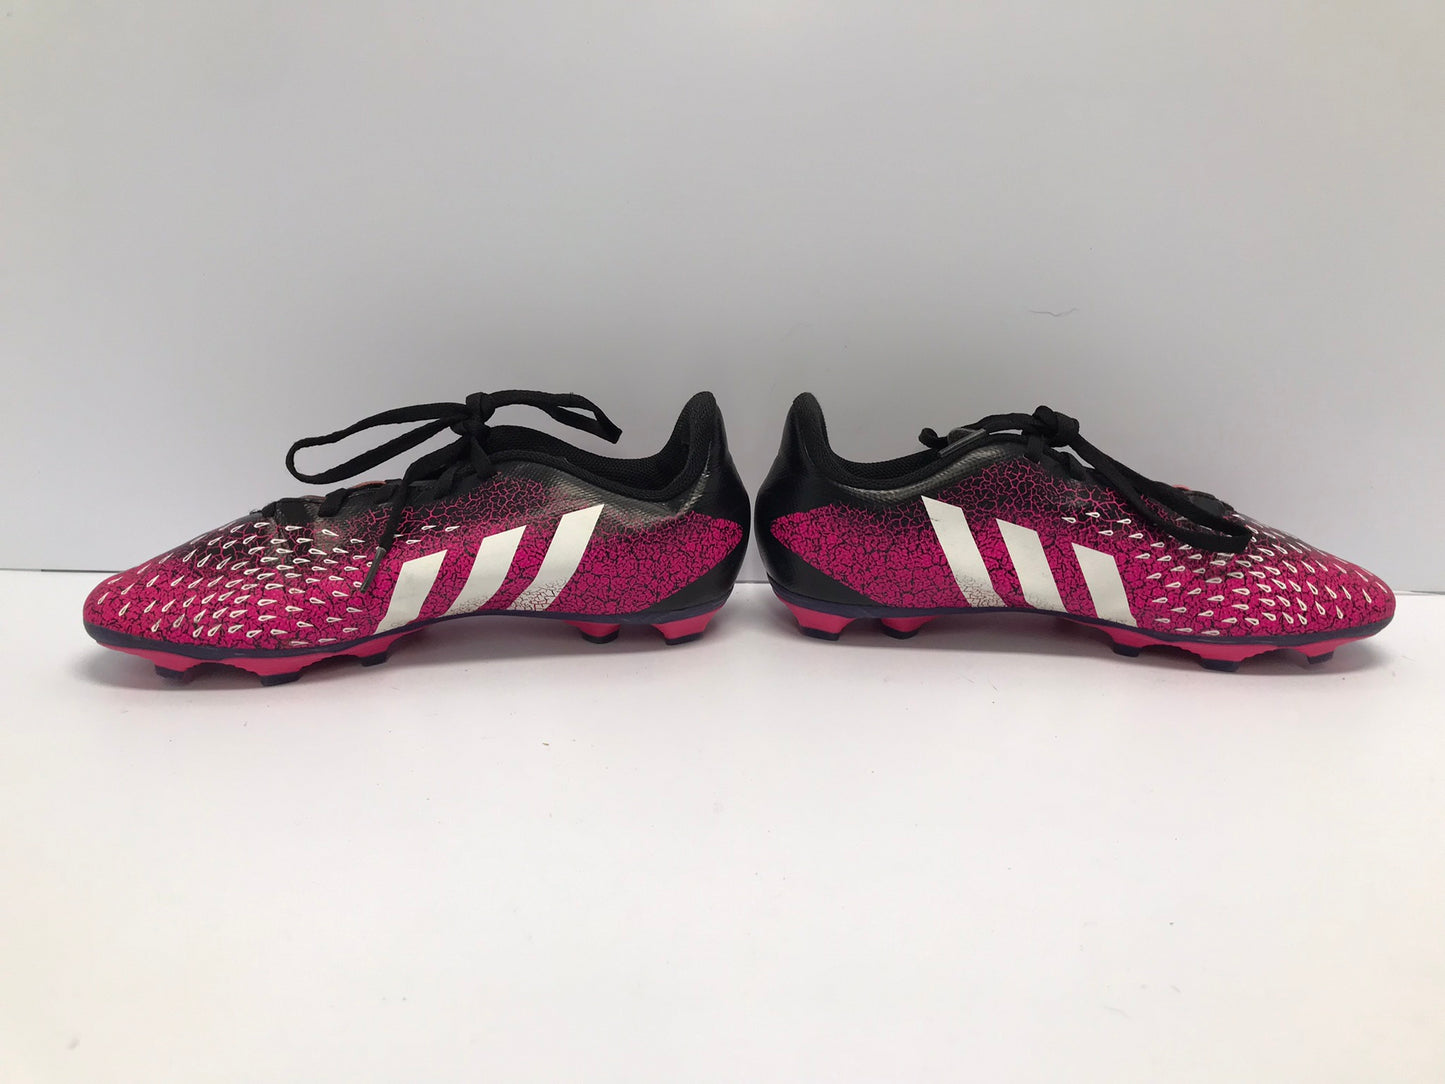 Soccer Shoes Cleats Men's Size 6 Adidas Preditor Pink Black Excellent